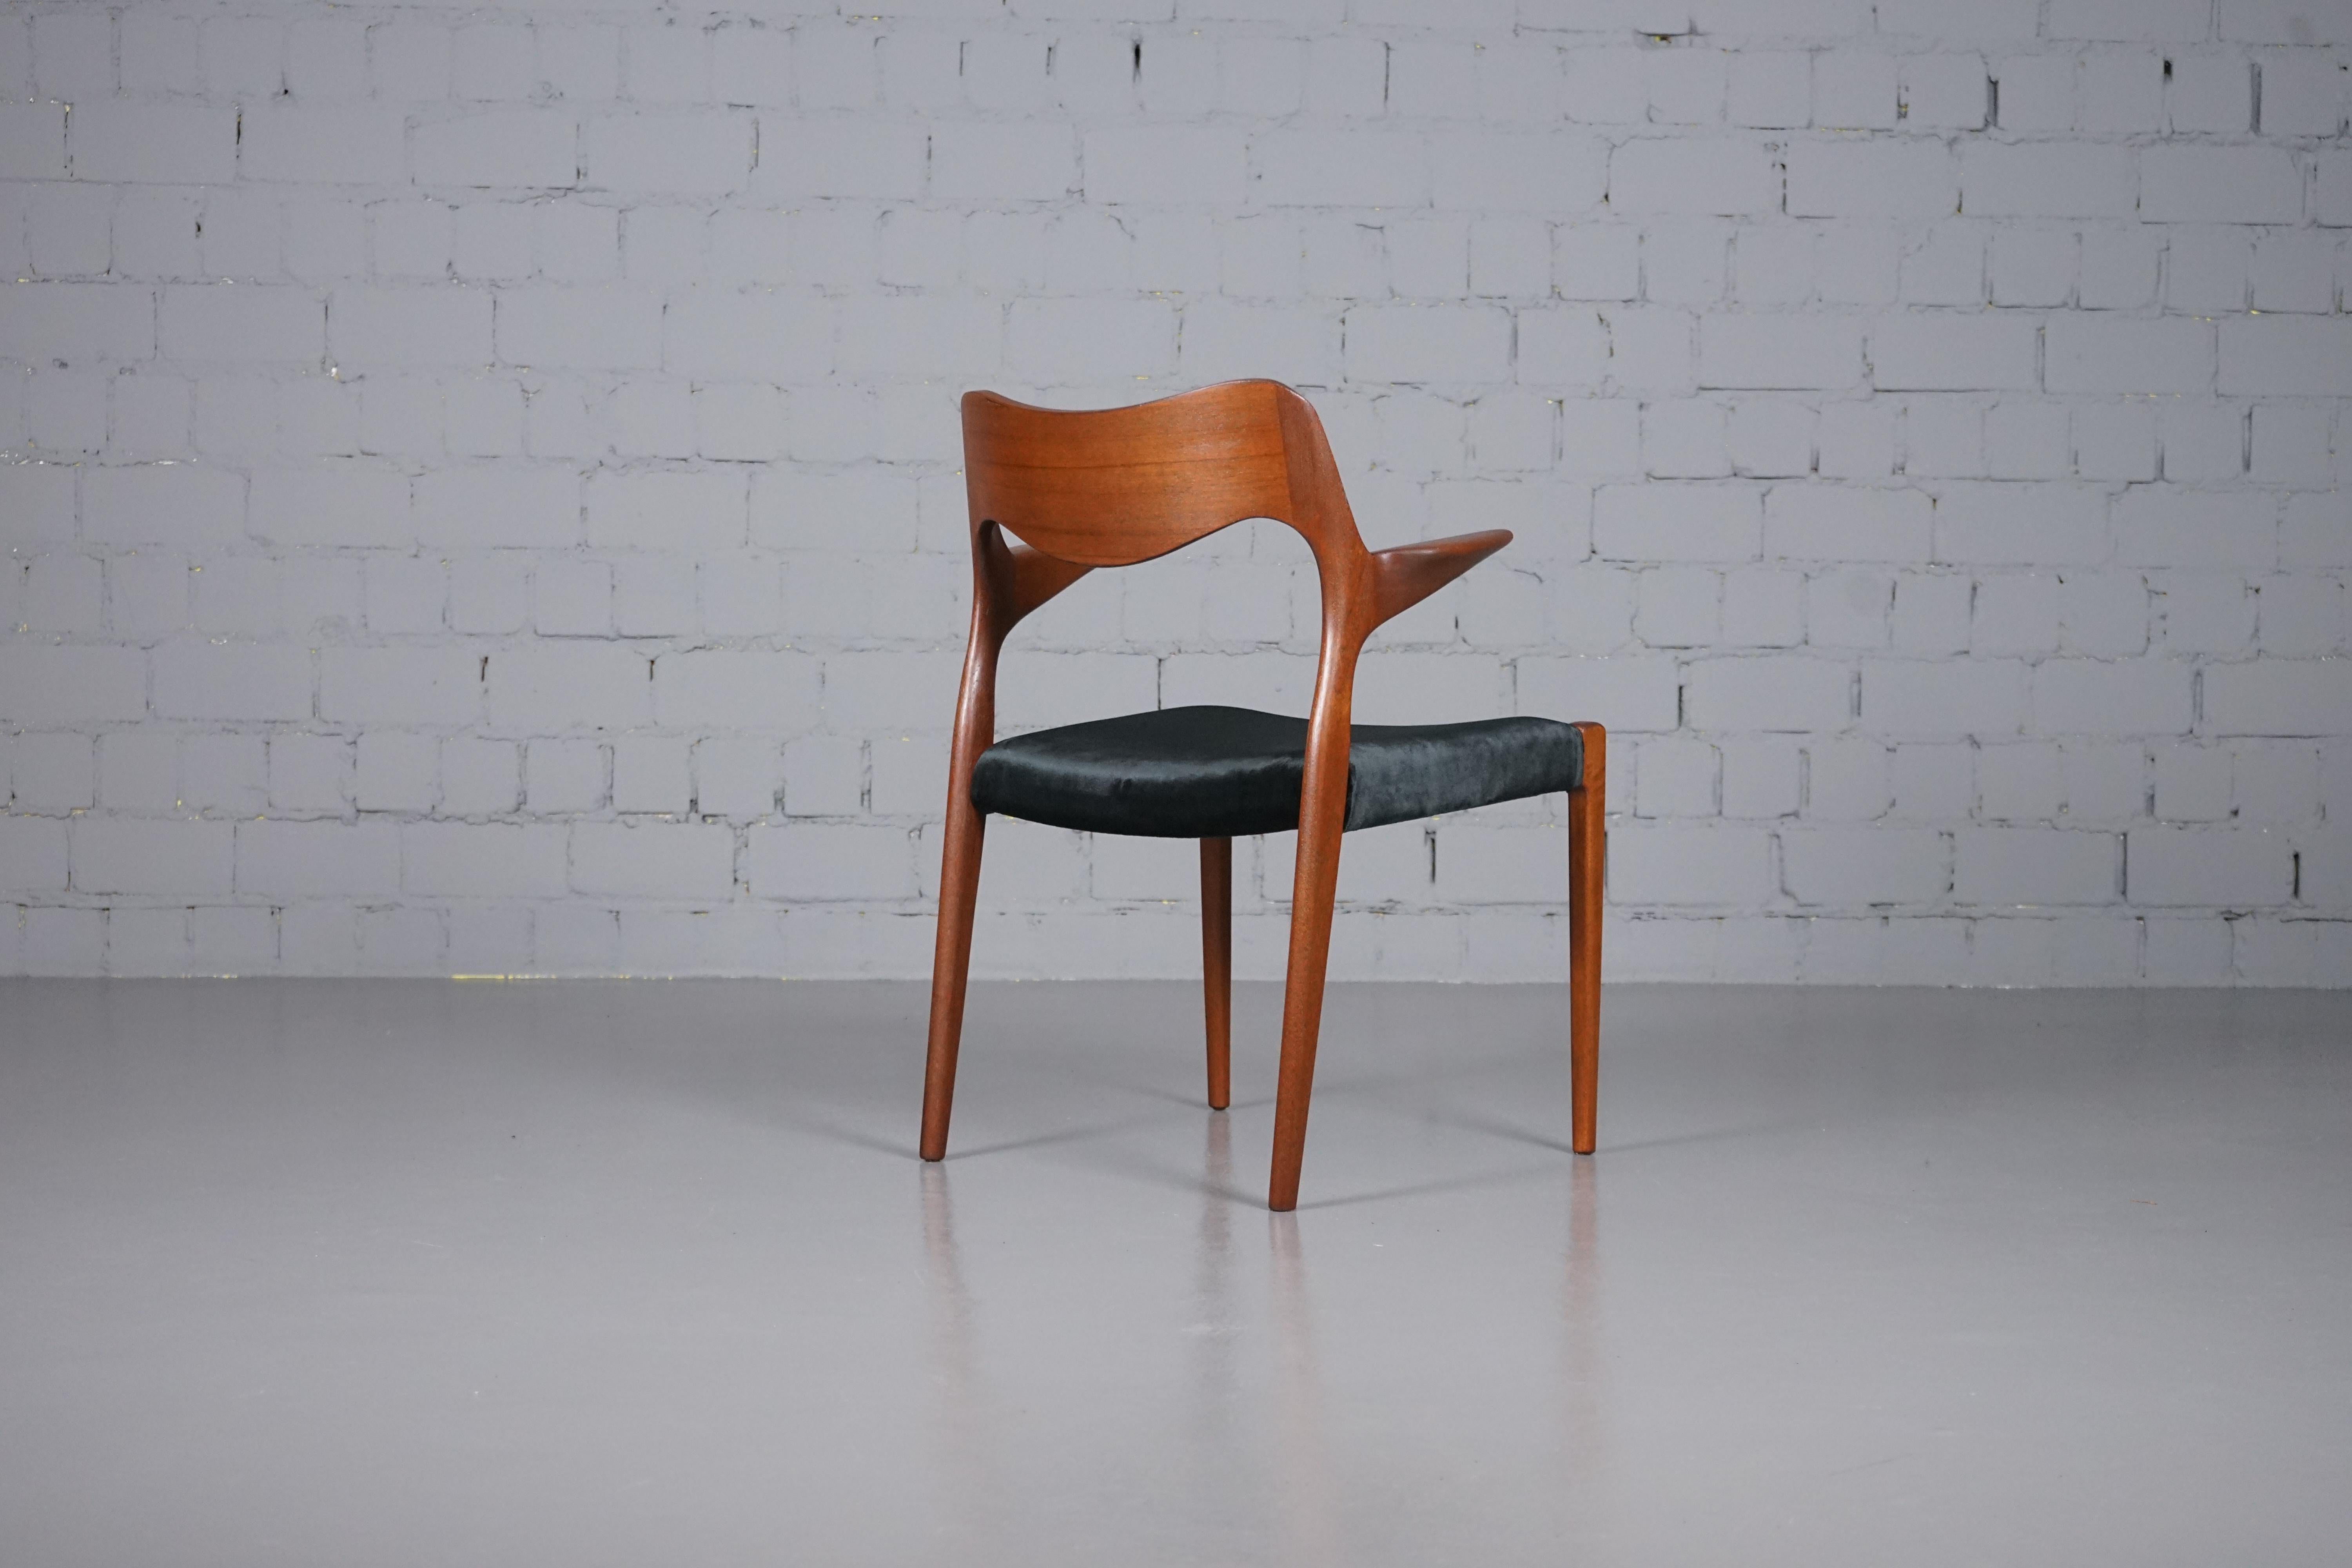 Mid-20th Century Teak Chair Model No. 55 Chair by Niels O. Moller for J.L Møller For Sale